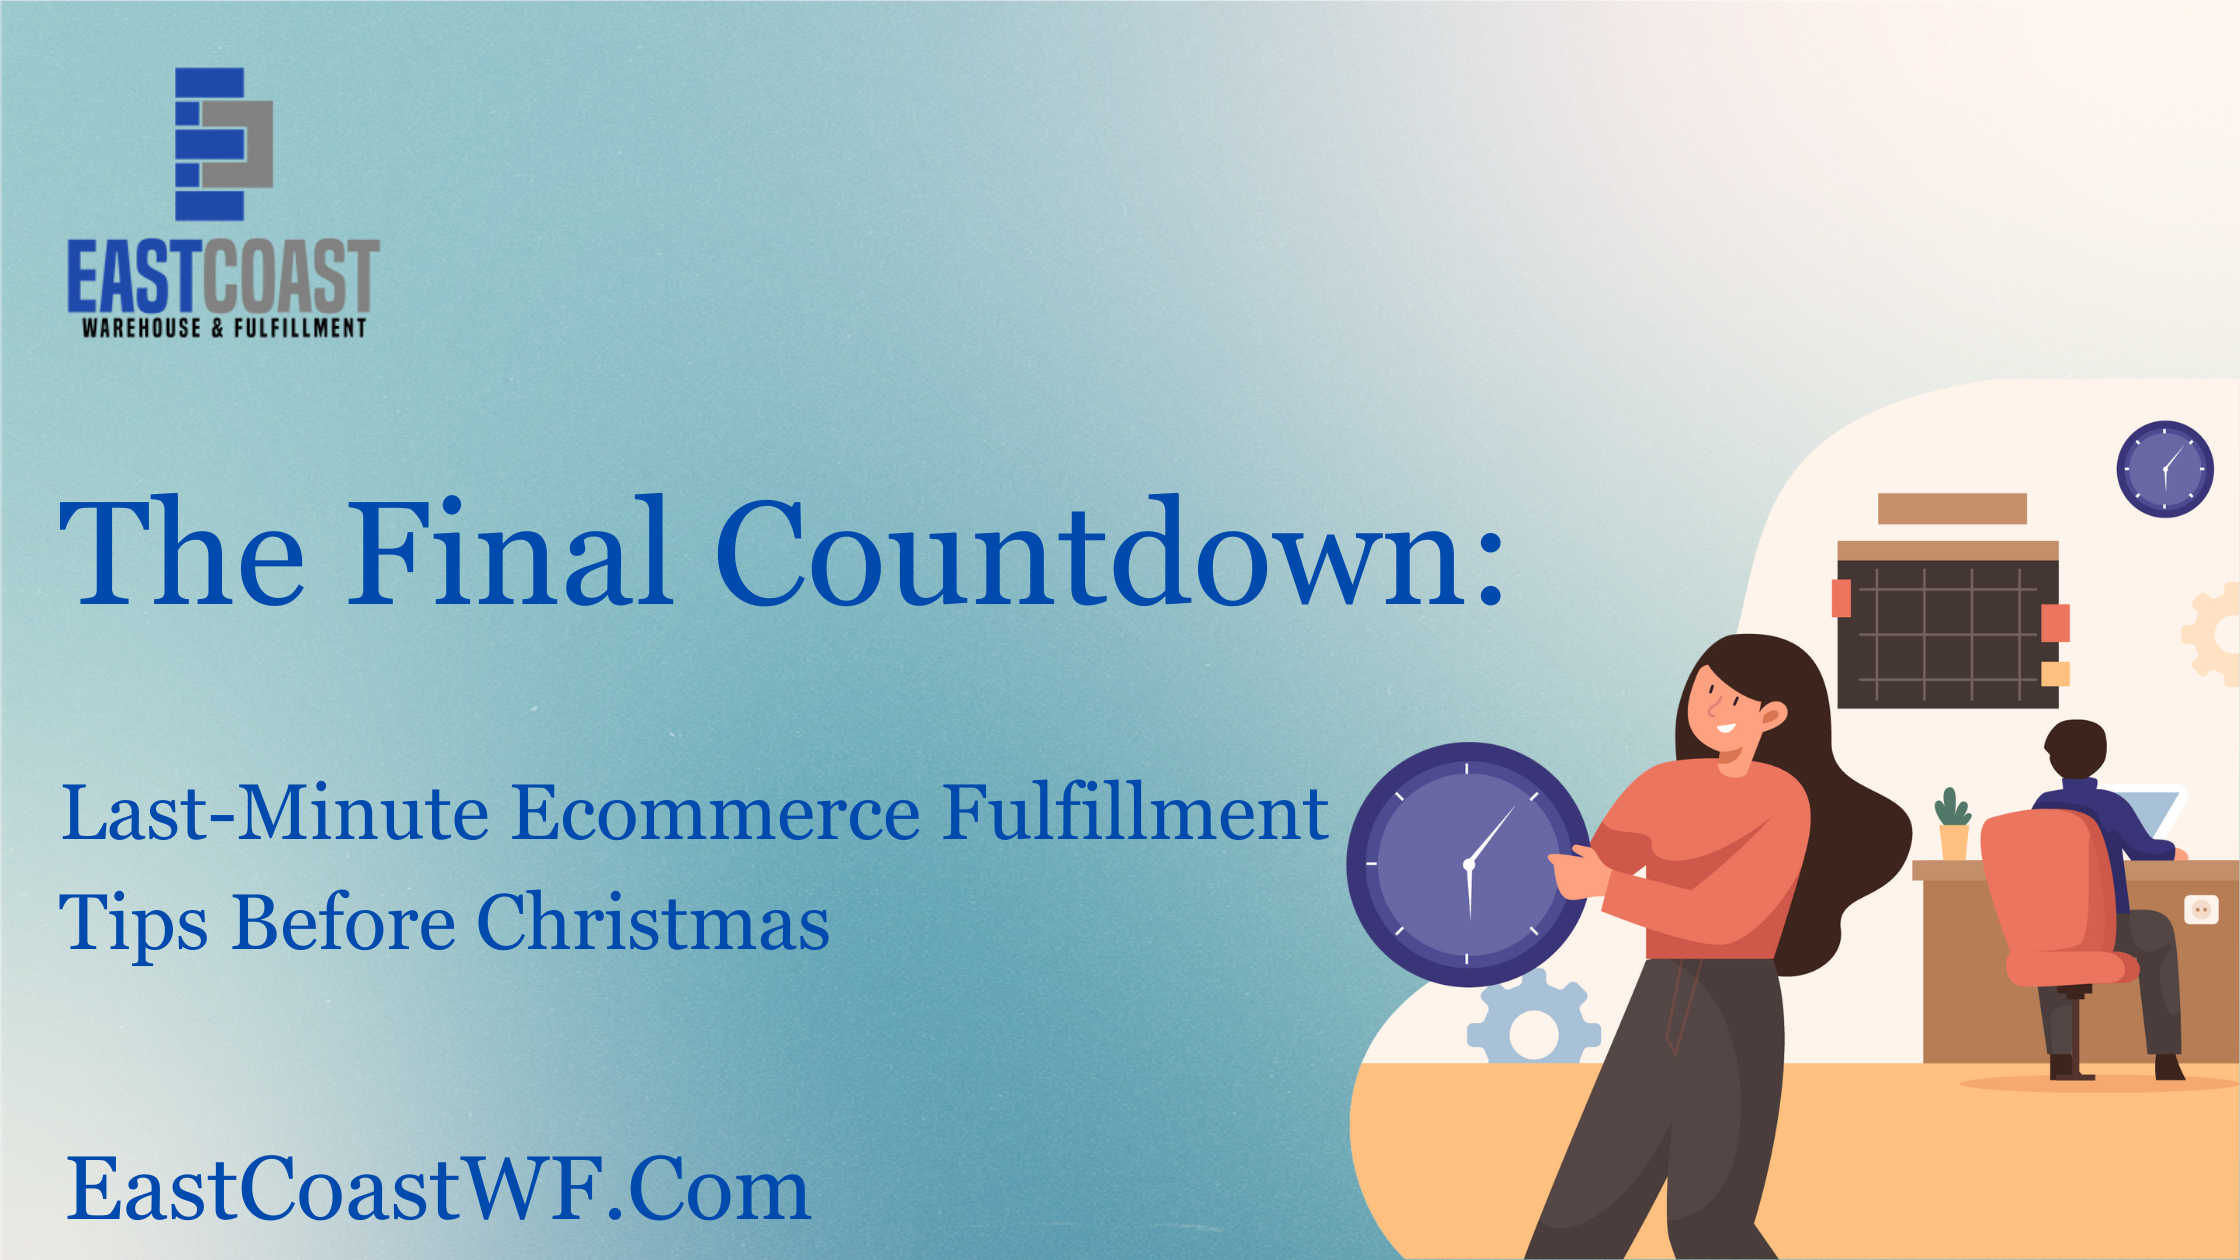 The Final Countdown: Last-Minute Ecommerce Fulfillment Tips Before Christmas